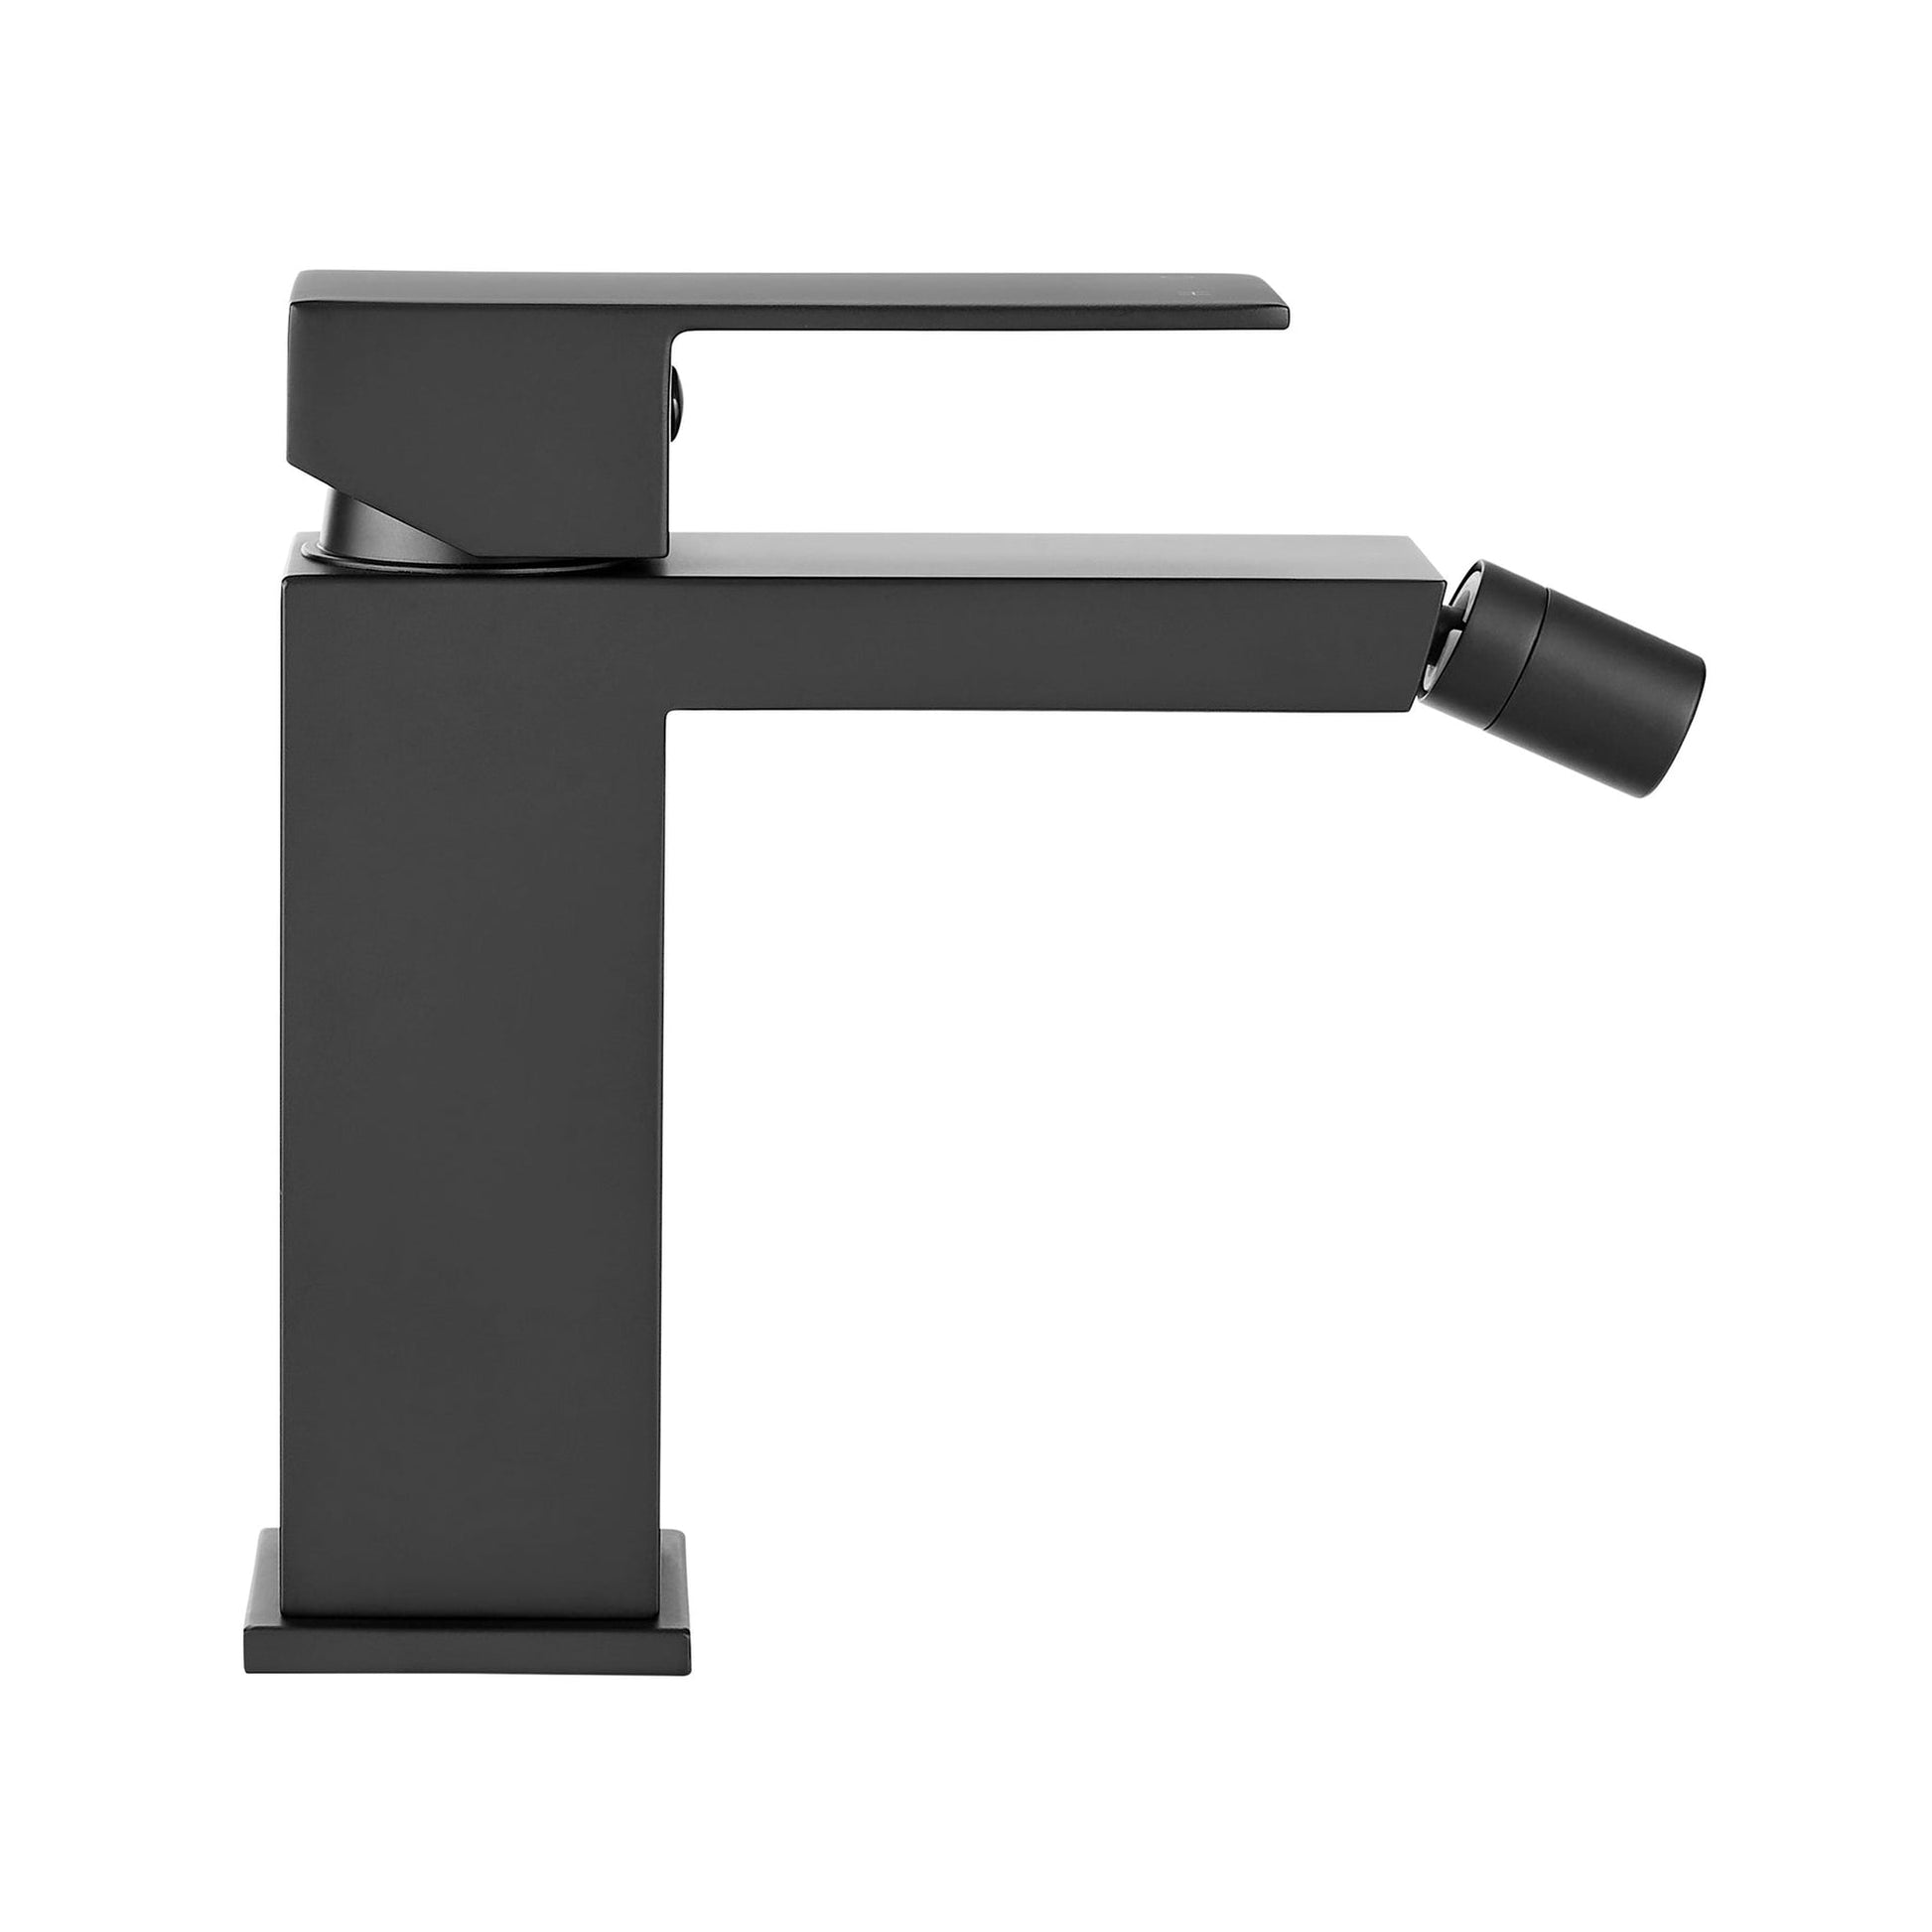 Swiss Madison Concorde 6" Matte Black Single Hole Fixture Mounted Bidet Faucet With Flow Rate of 1.28 GPM